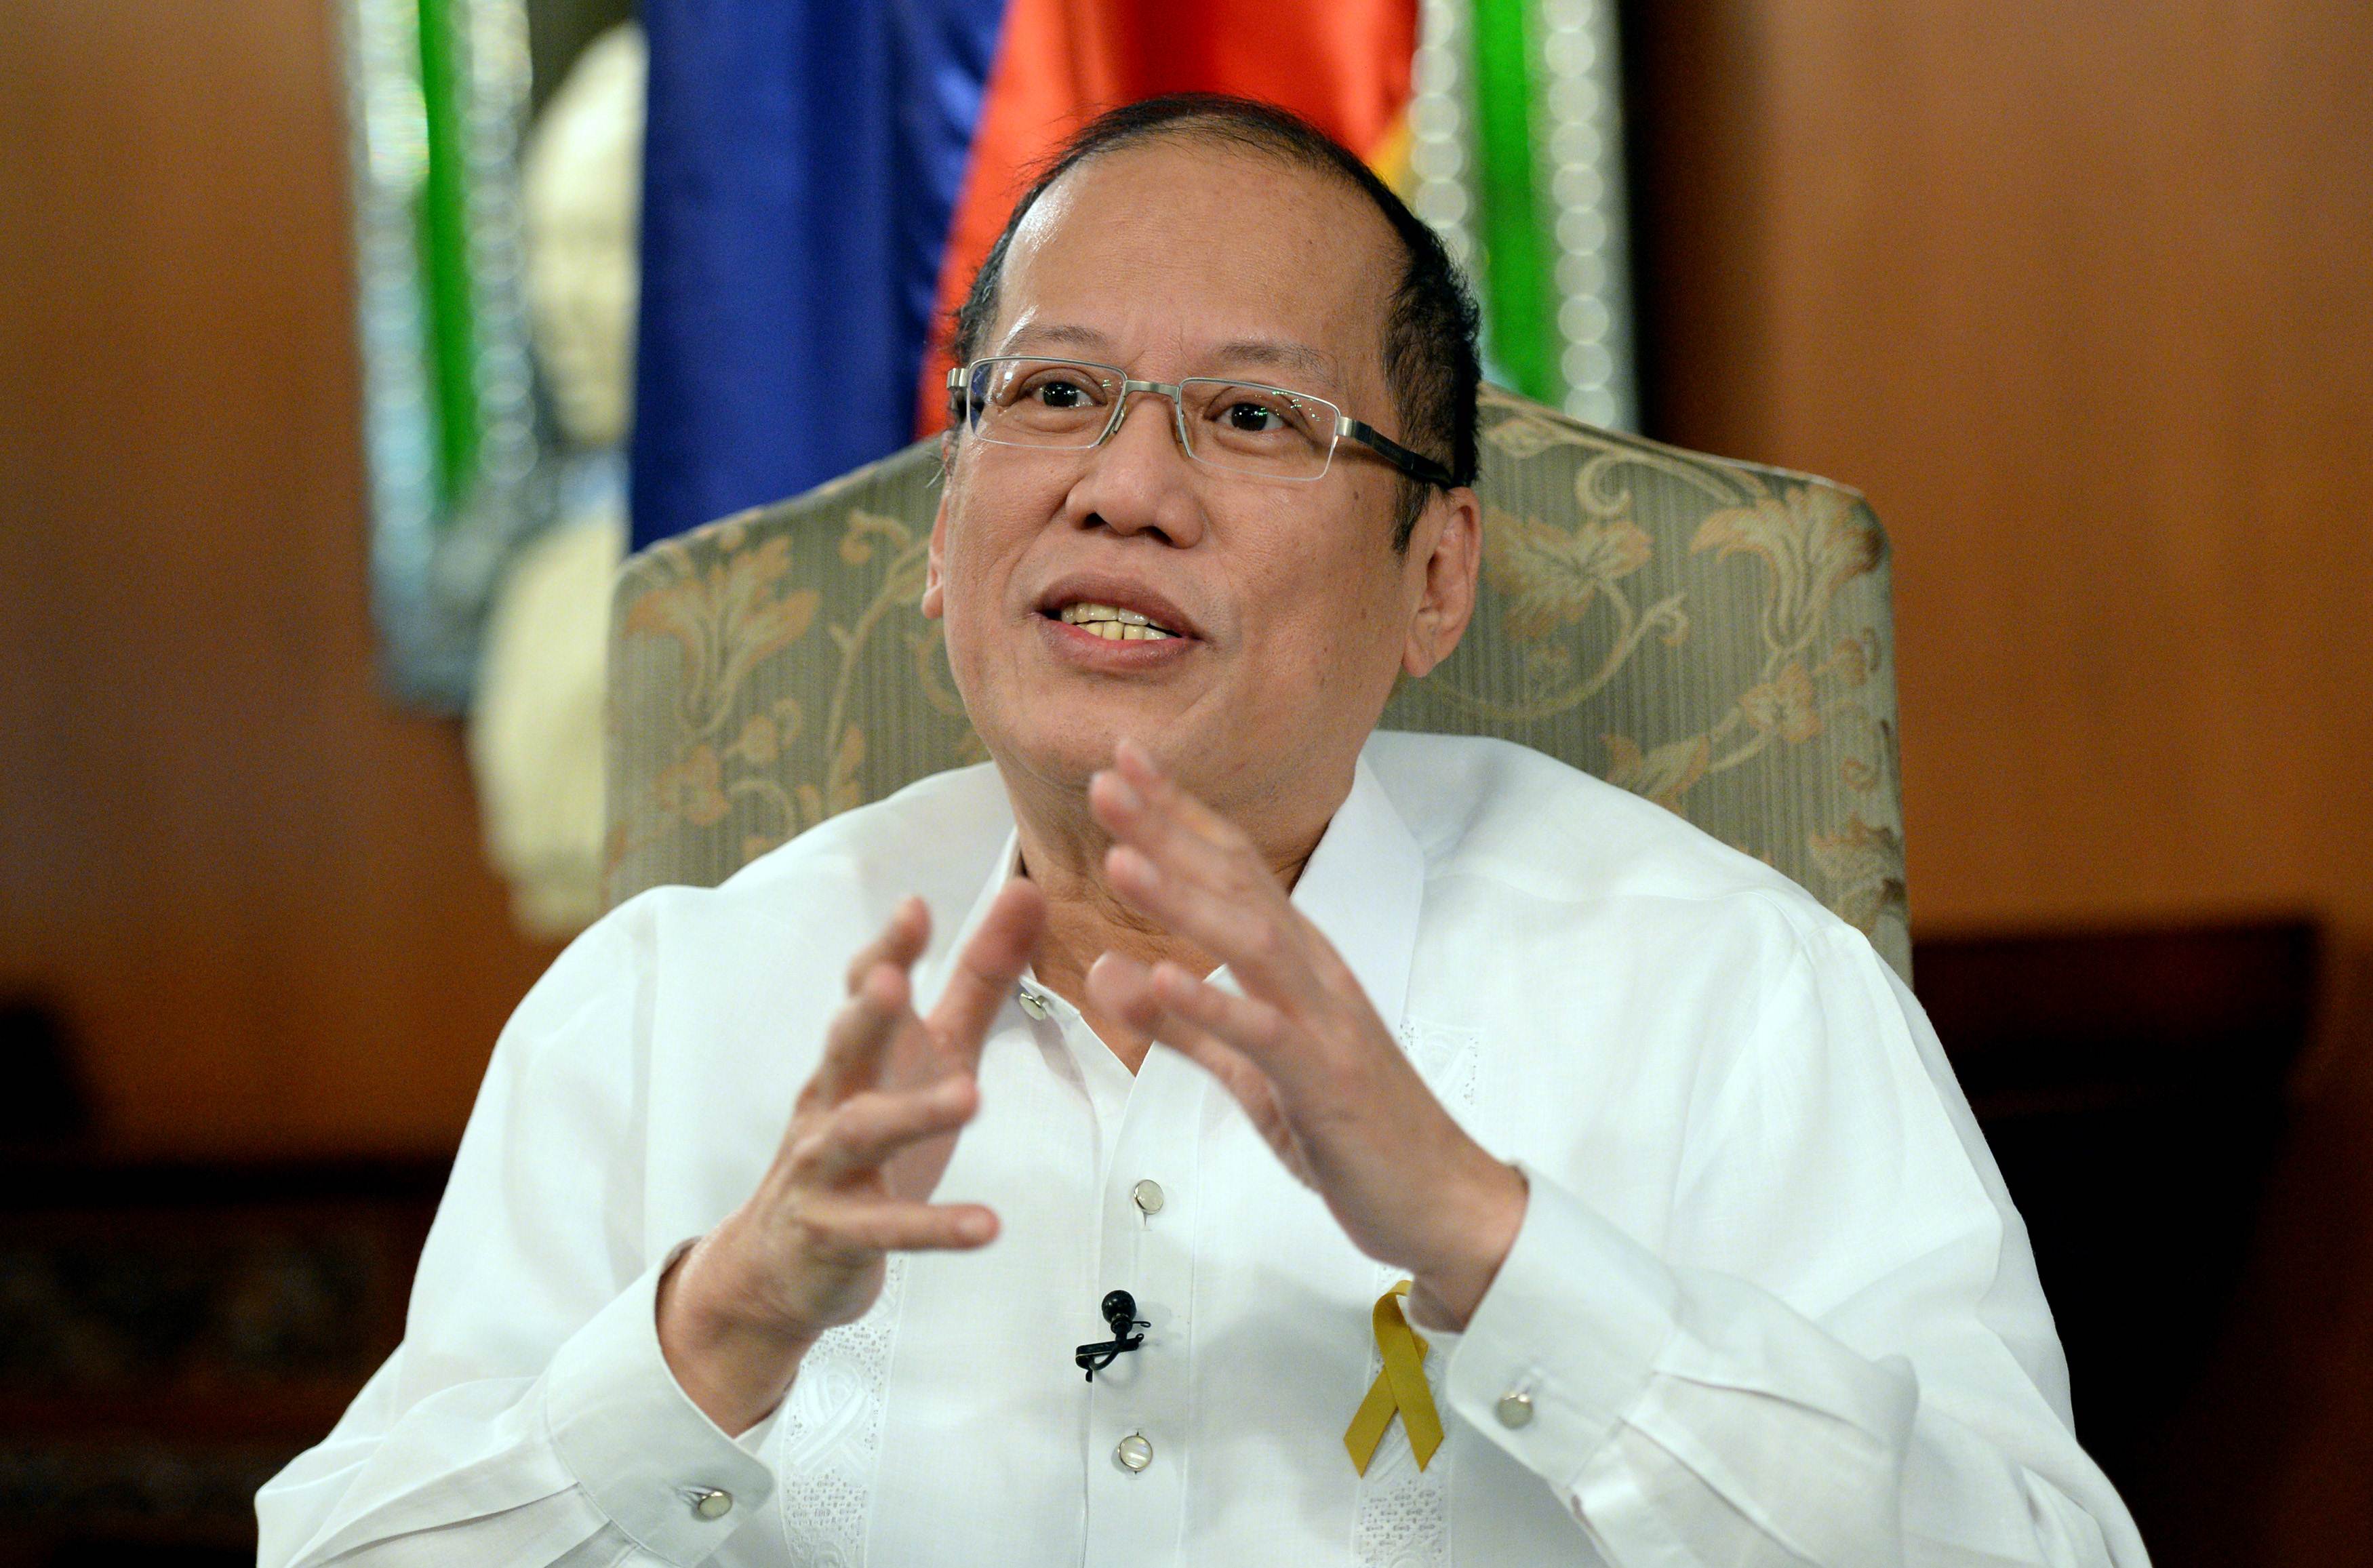 As his presidential term winds down, Aquino's legacy best lies in engaging and reaching out to China. Photo: AFP